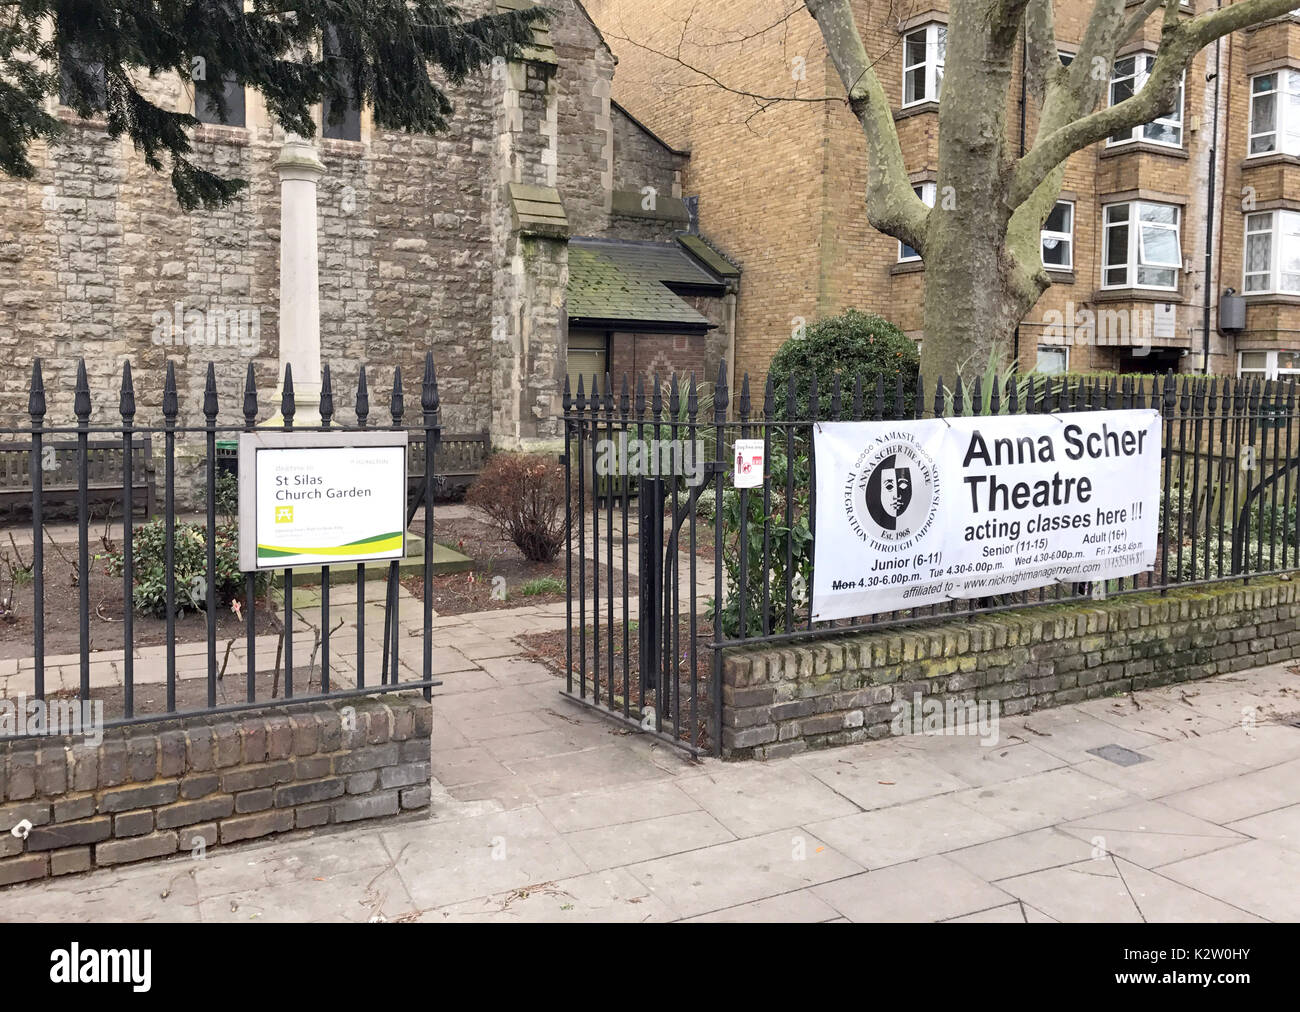 Photo Must Be Credited ©Alpha Press 066465 26/02/2017 Anna Scher Theatre Acting School at Saint Silas Church in Pentonville, Islington, North London. Stock Photo